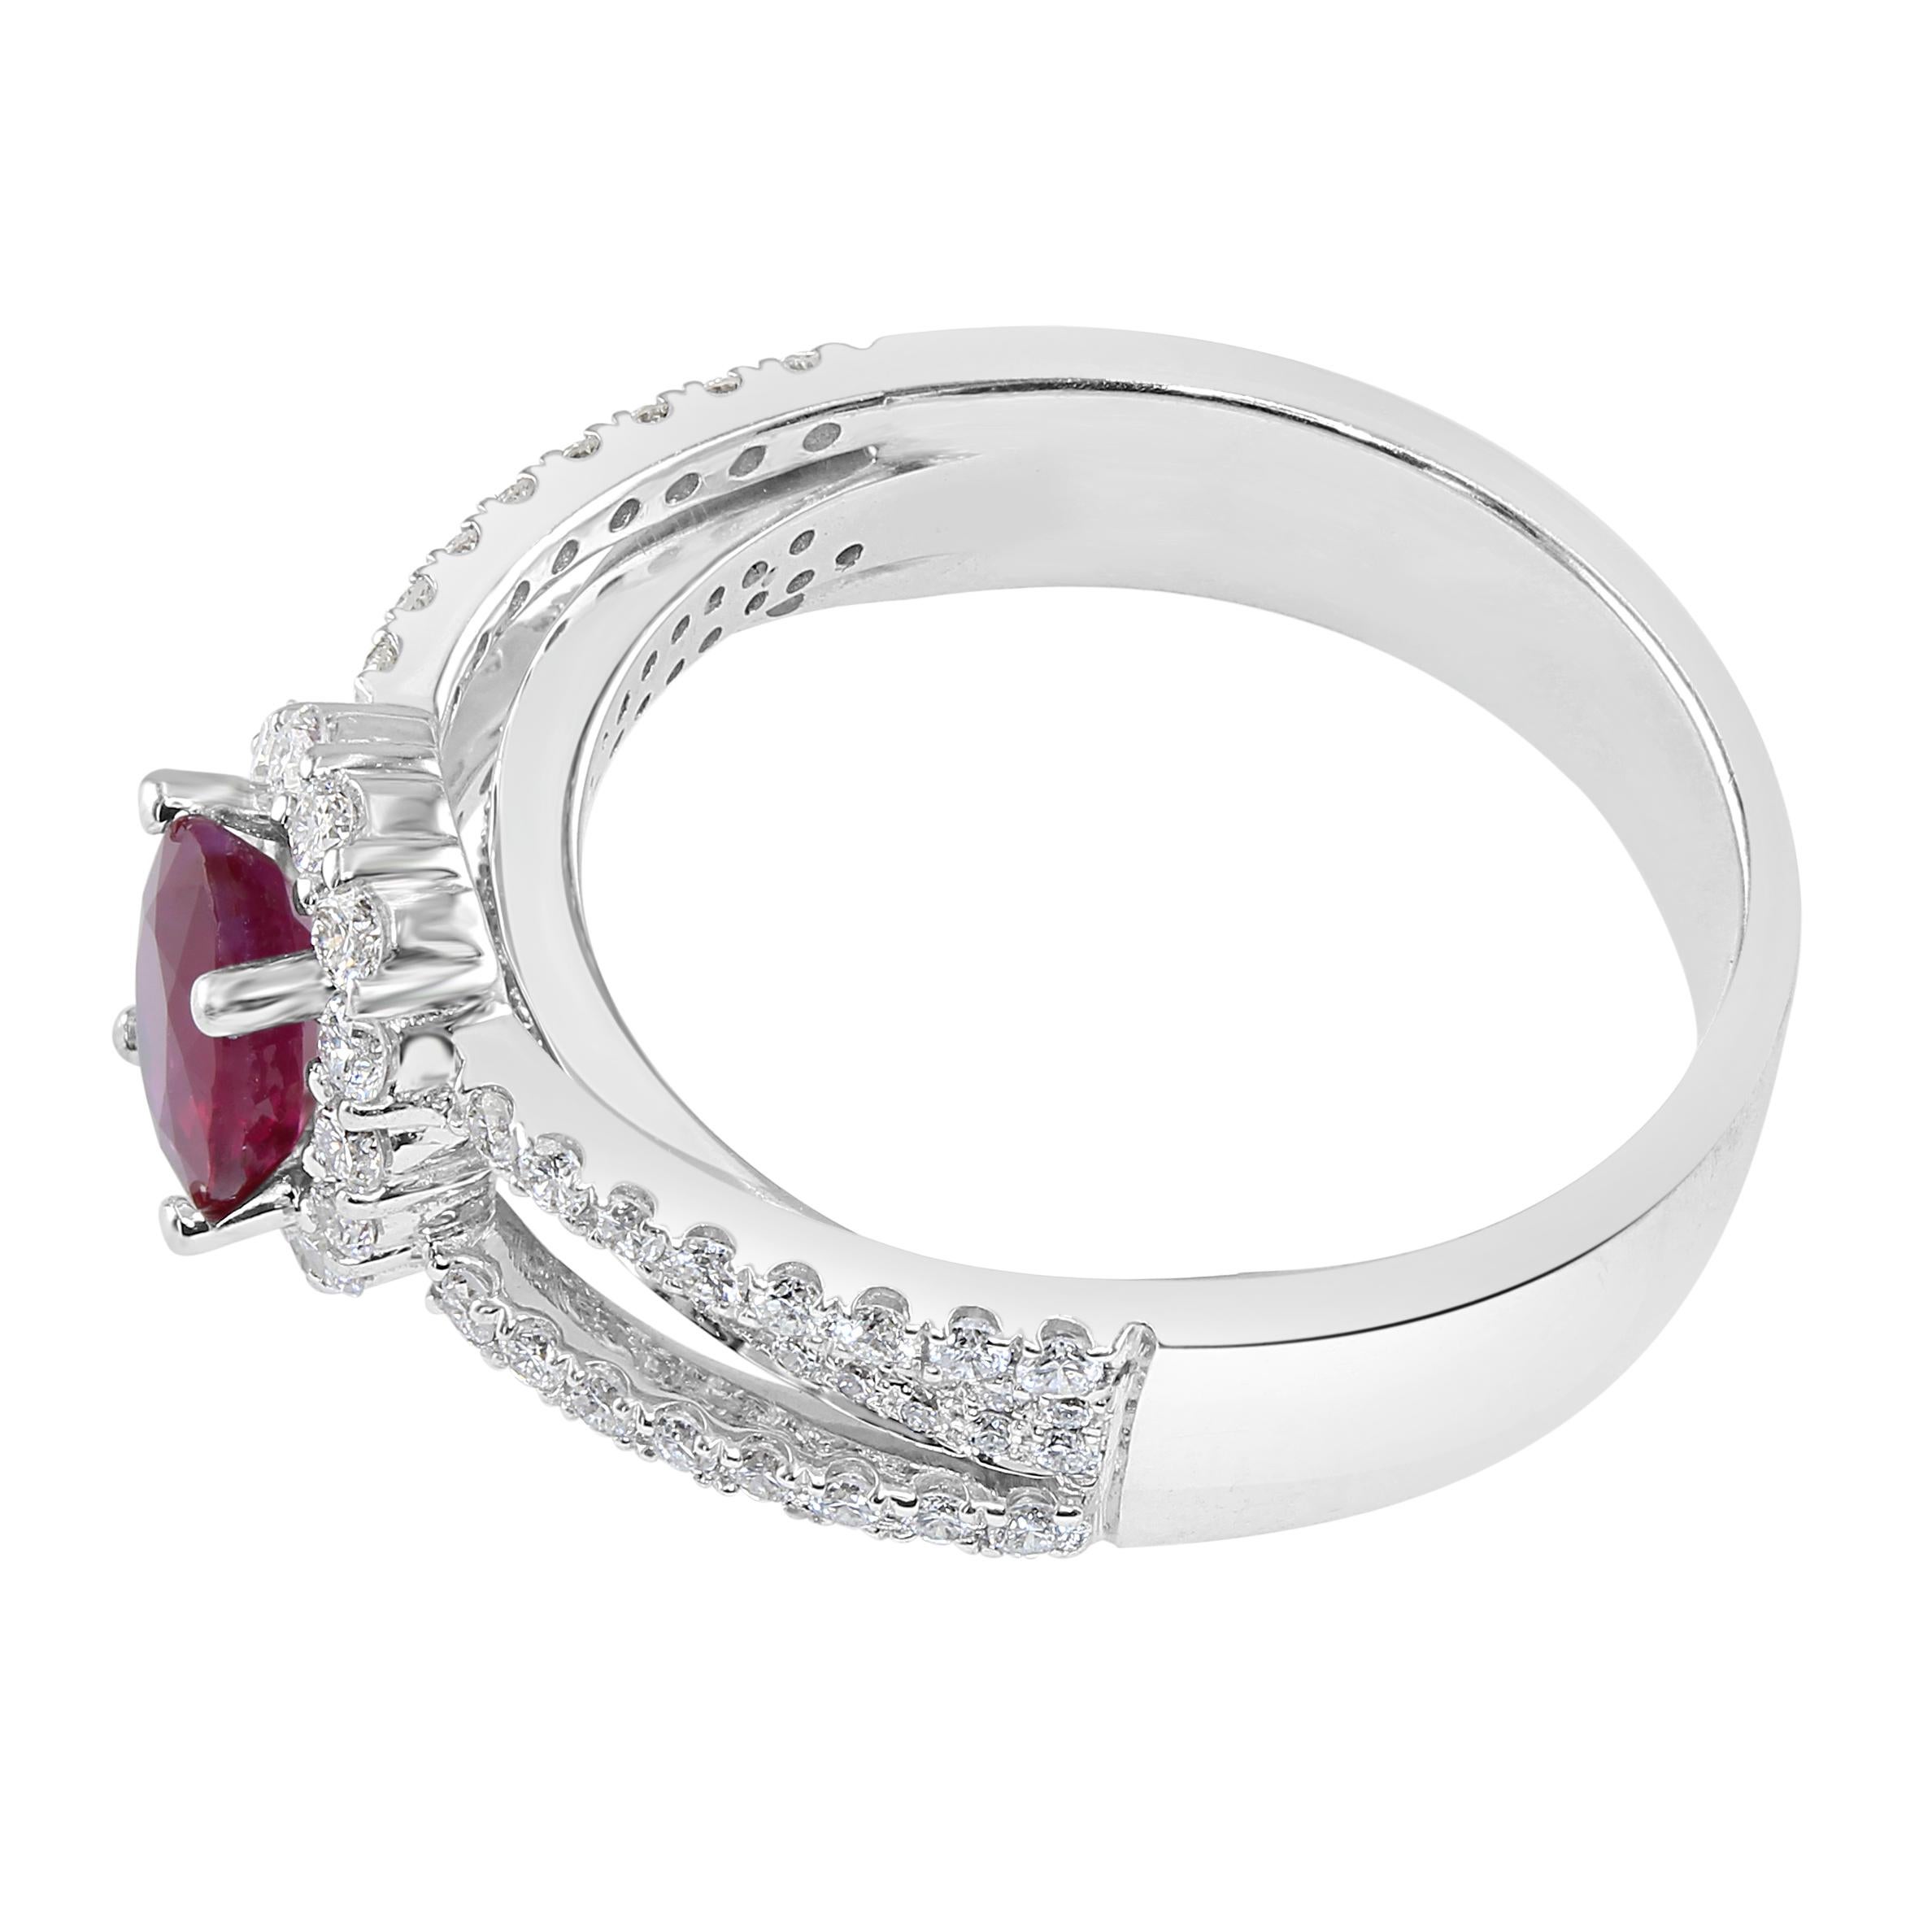 Gorgeous 0.95 carat Oval Ruby, surrounded by a diamond halo. 

Total diamond weight: 0.63 carat.

Set in 18K White Gold.

This vivid Ruby is a stunning one-of-a-kind option for a unique engagement ring. May also be worn as a beautiful right-hand